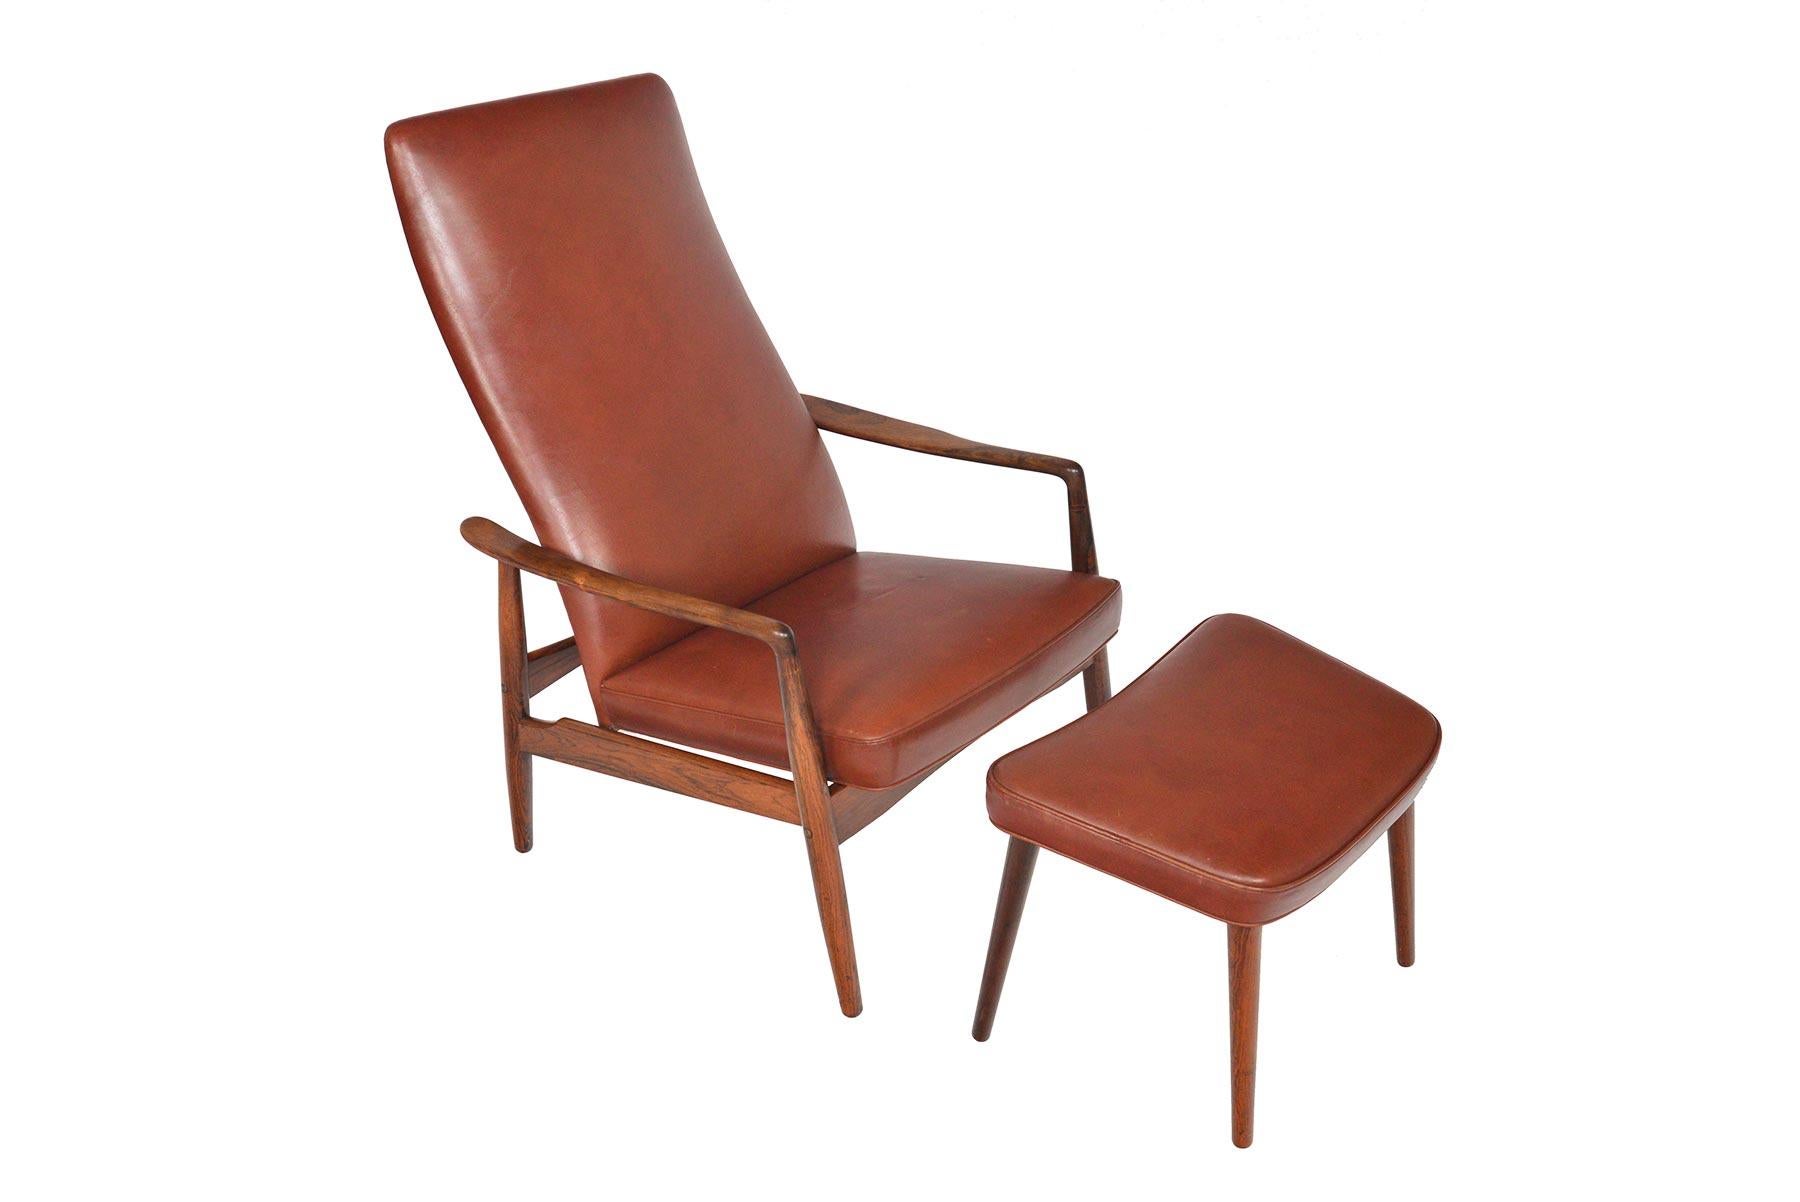 This Danish modern sienna brown leather reclining lounge chair and matching ottoman were designed by Søren Ladefoged for Søren Ladefoged and Søn as Model 72 in 1966. Beautifully crafted with solid Brazilian rosewood spindle legs, this set offers